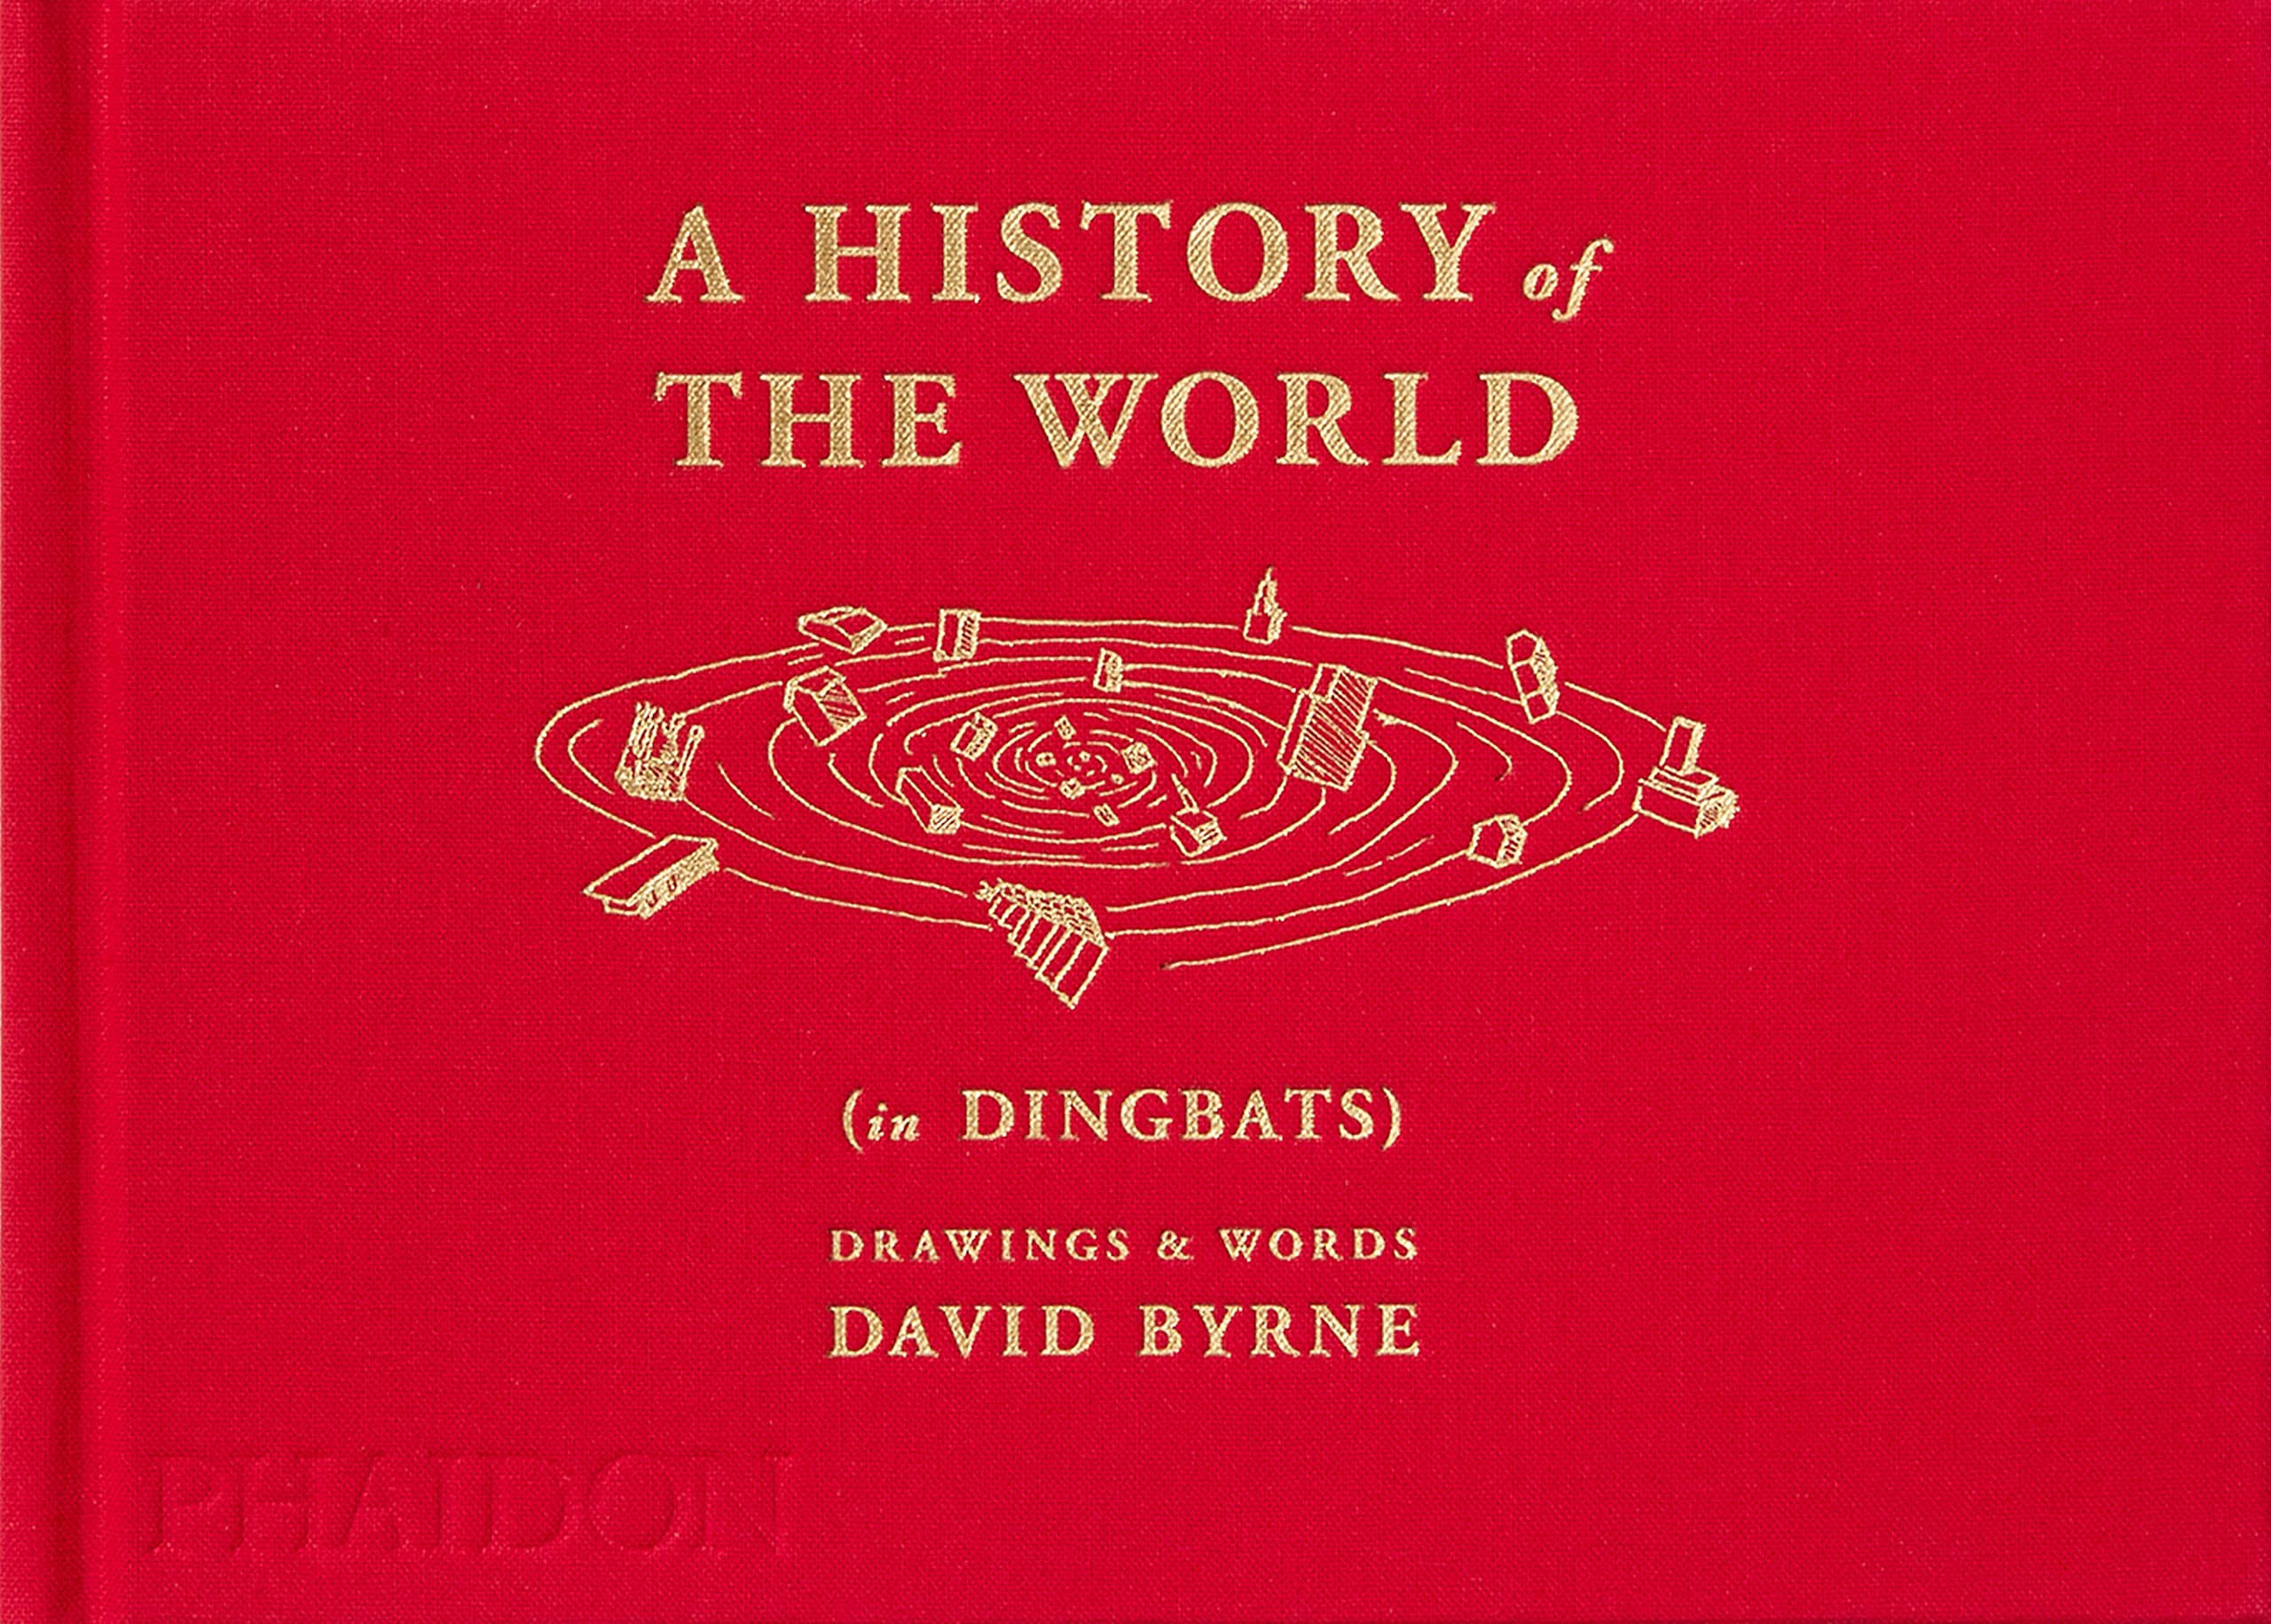 A History of The World (in Dingbats) by David Byrne